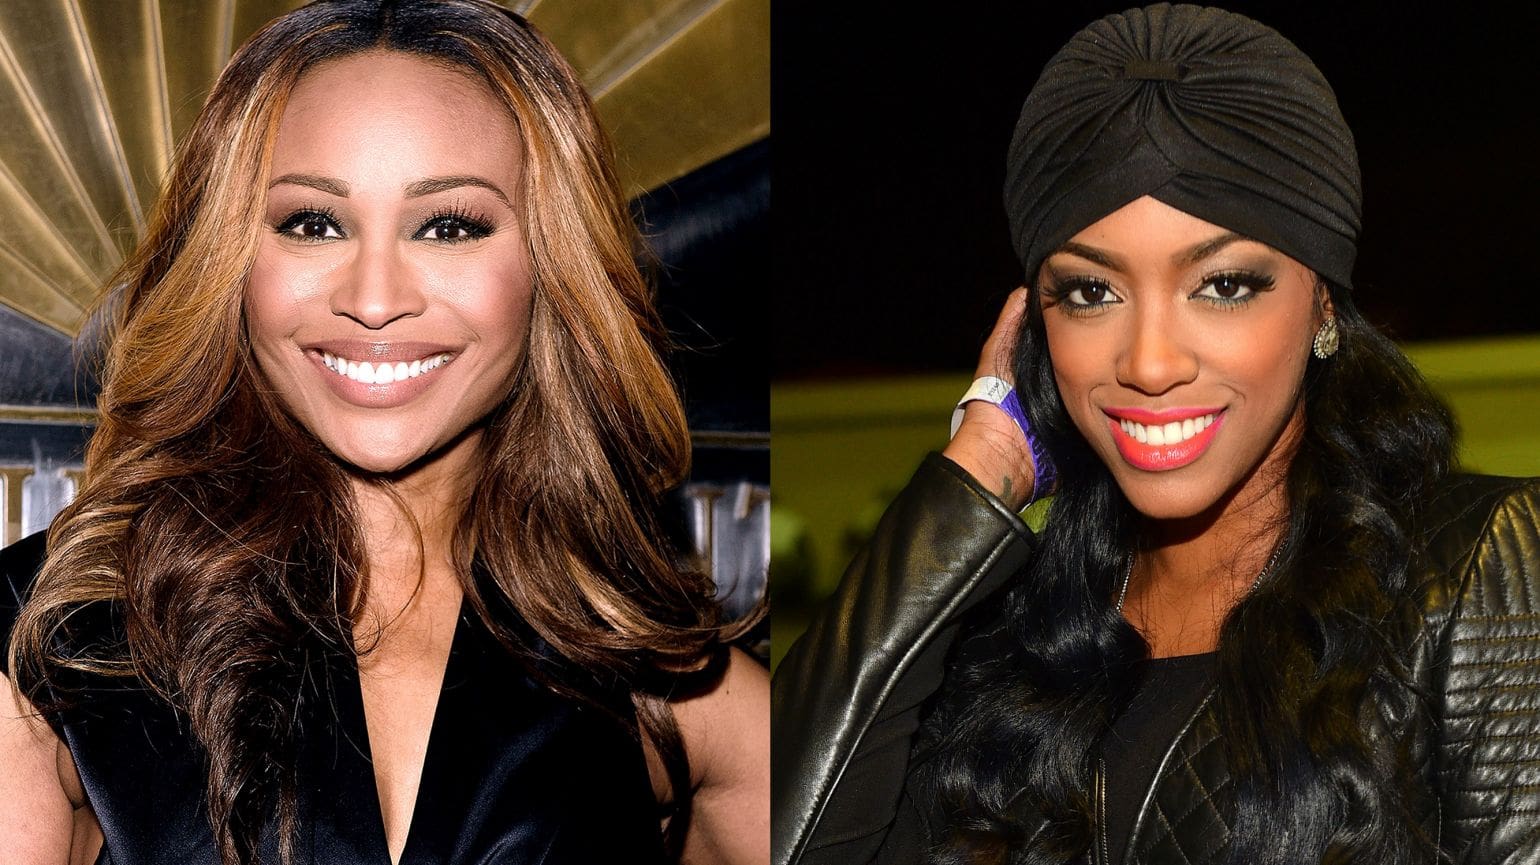 Porsha Williams Looks Like A Queen At Cynthia Bailey's Birthday Party - She Praises Their 'Rollercoaster Relationship'